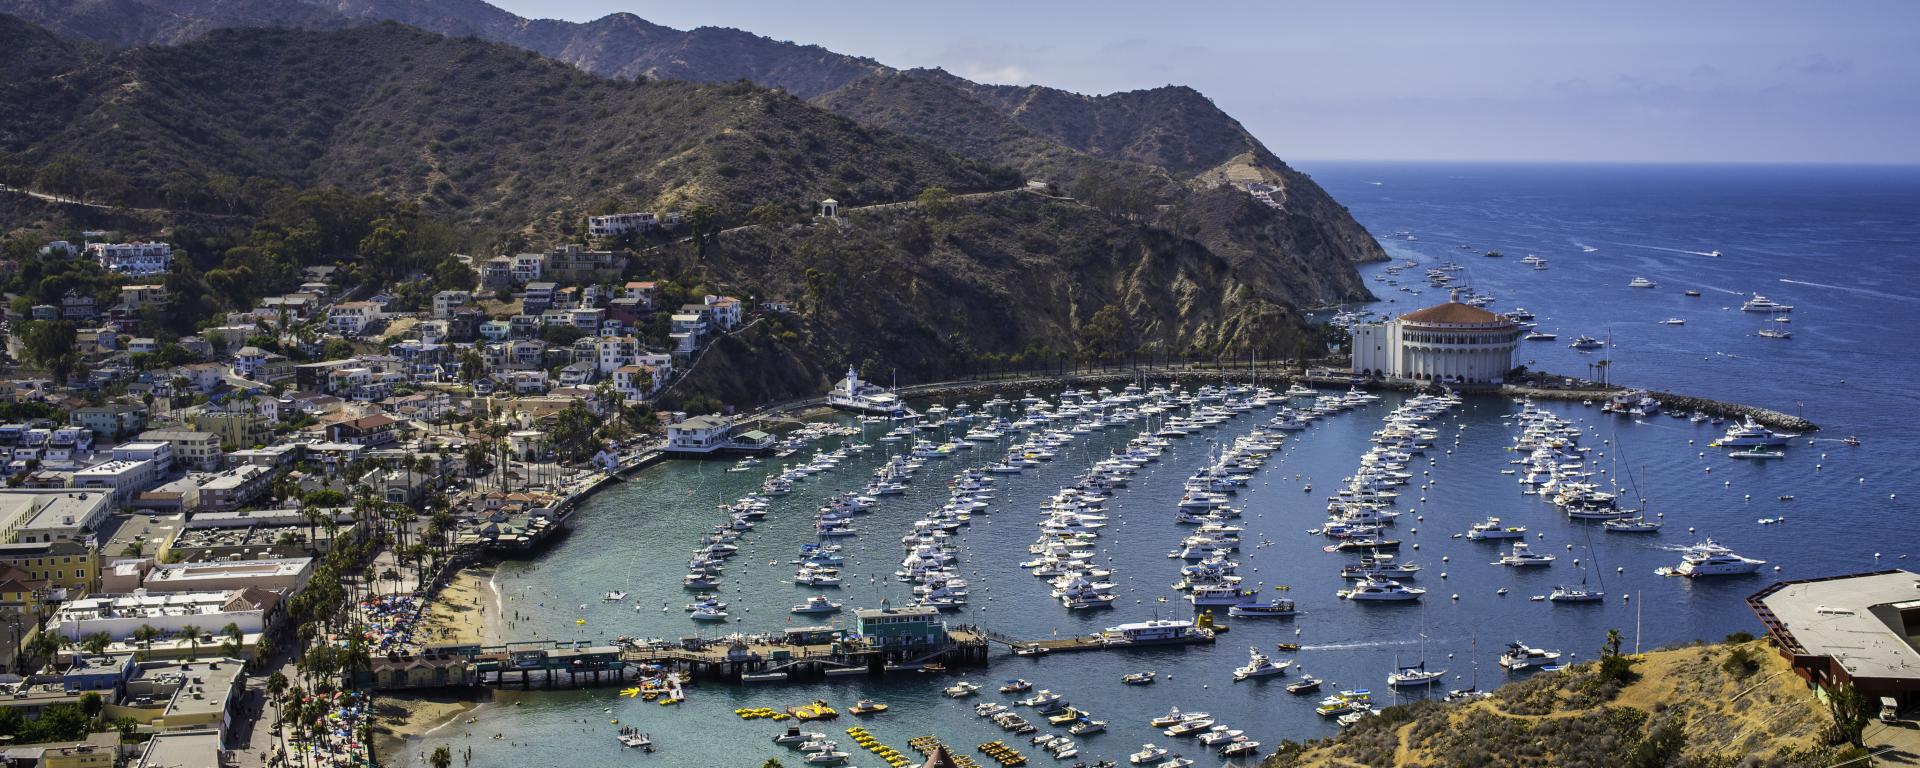 to Get to Catalina Island | Transportation & Tour Packages